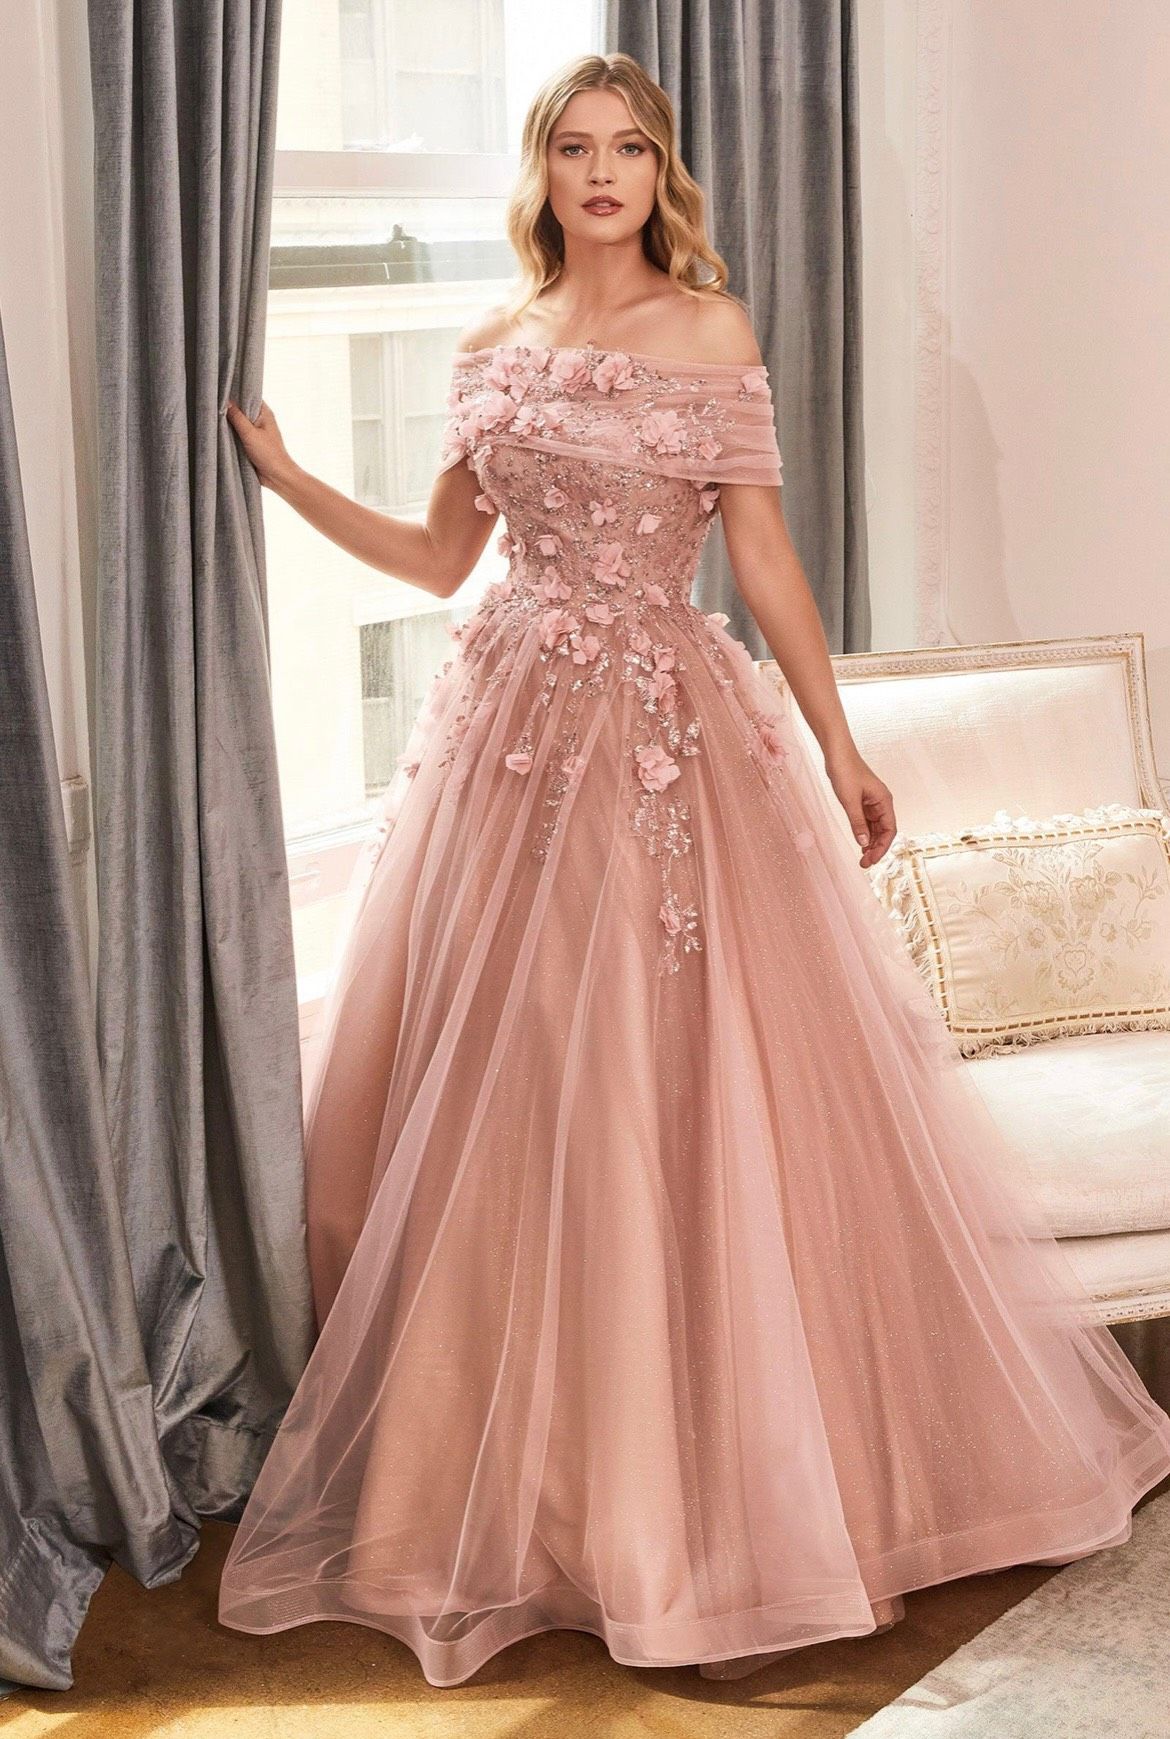 Cinderella divine Size 6 Prom Off The Shoulder Sequined Light Pink Ball Gown on Queenly